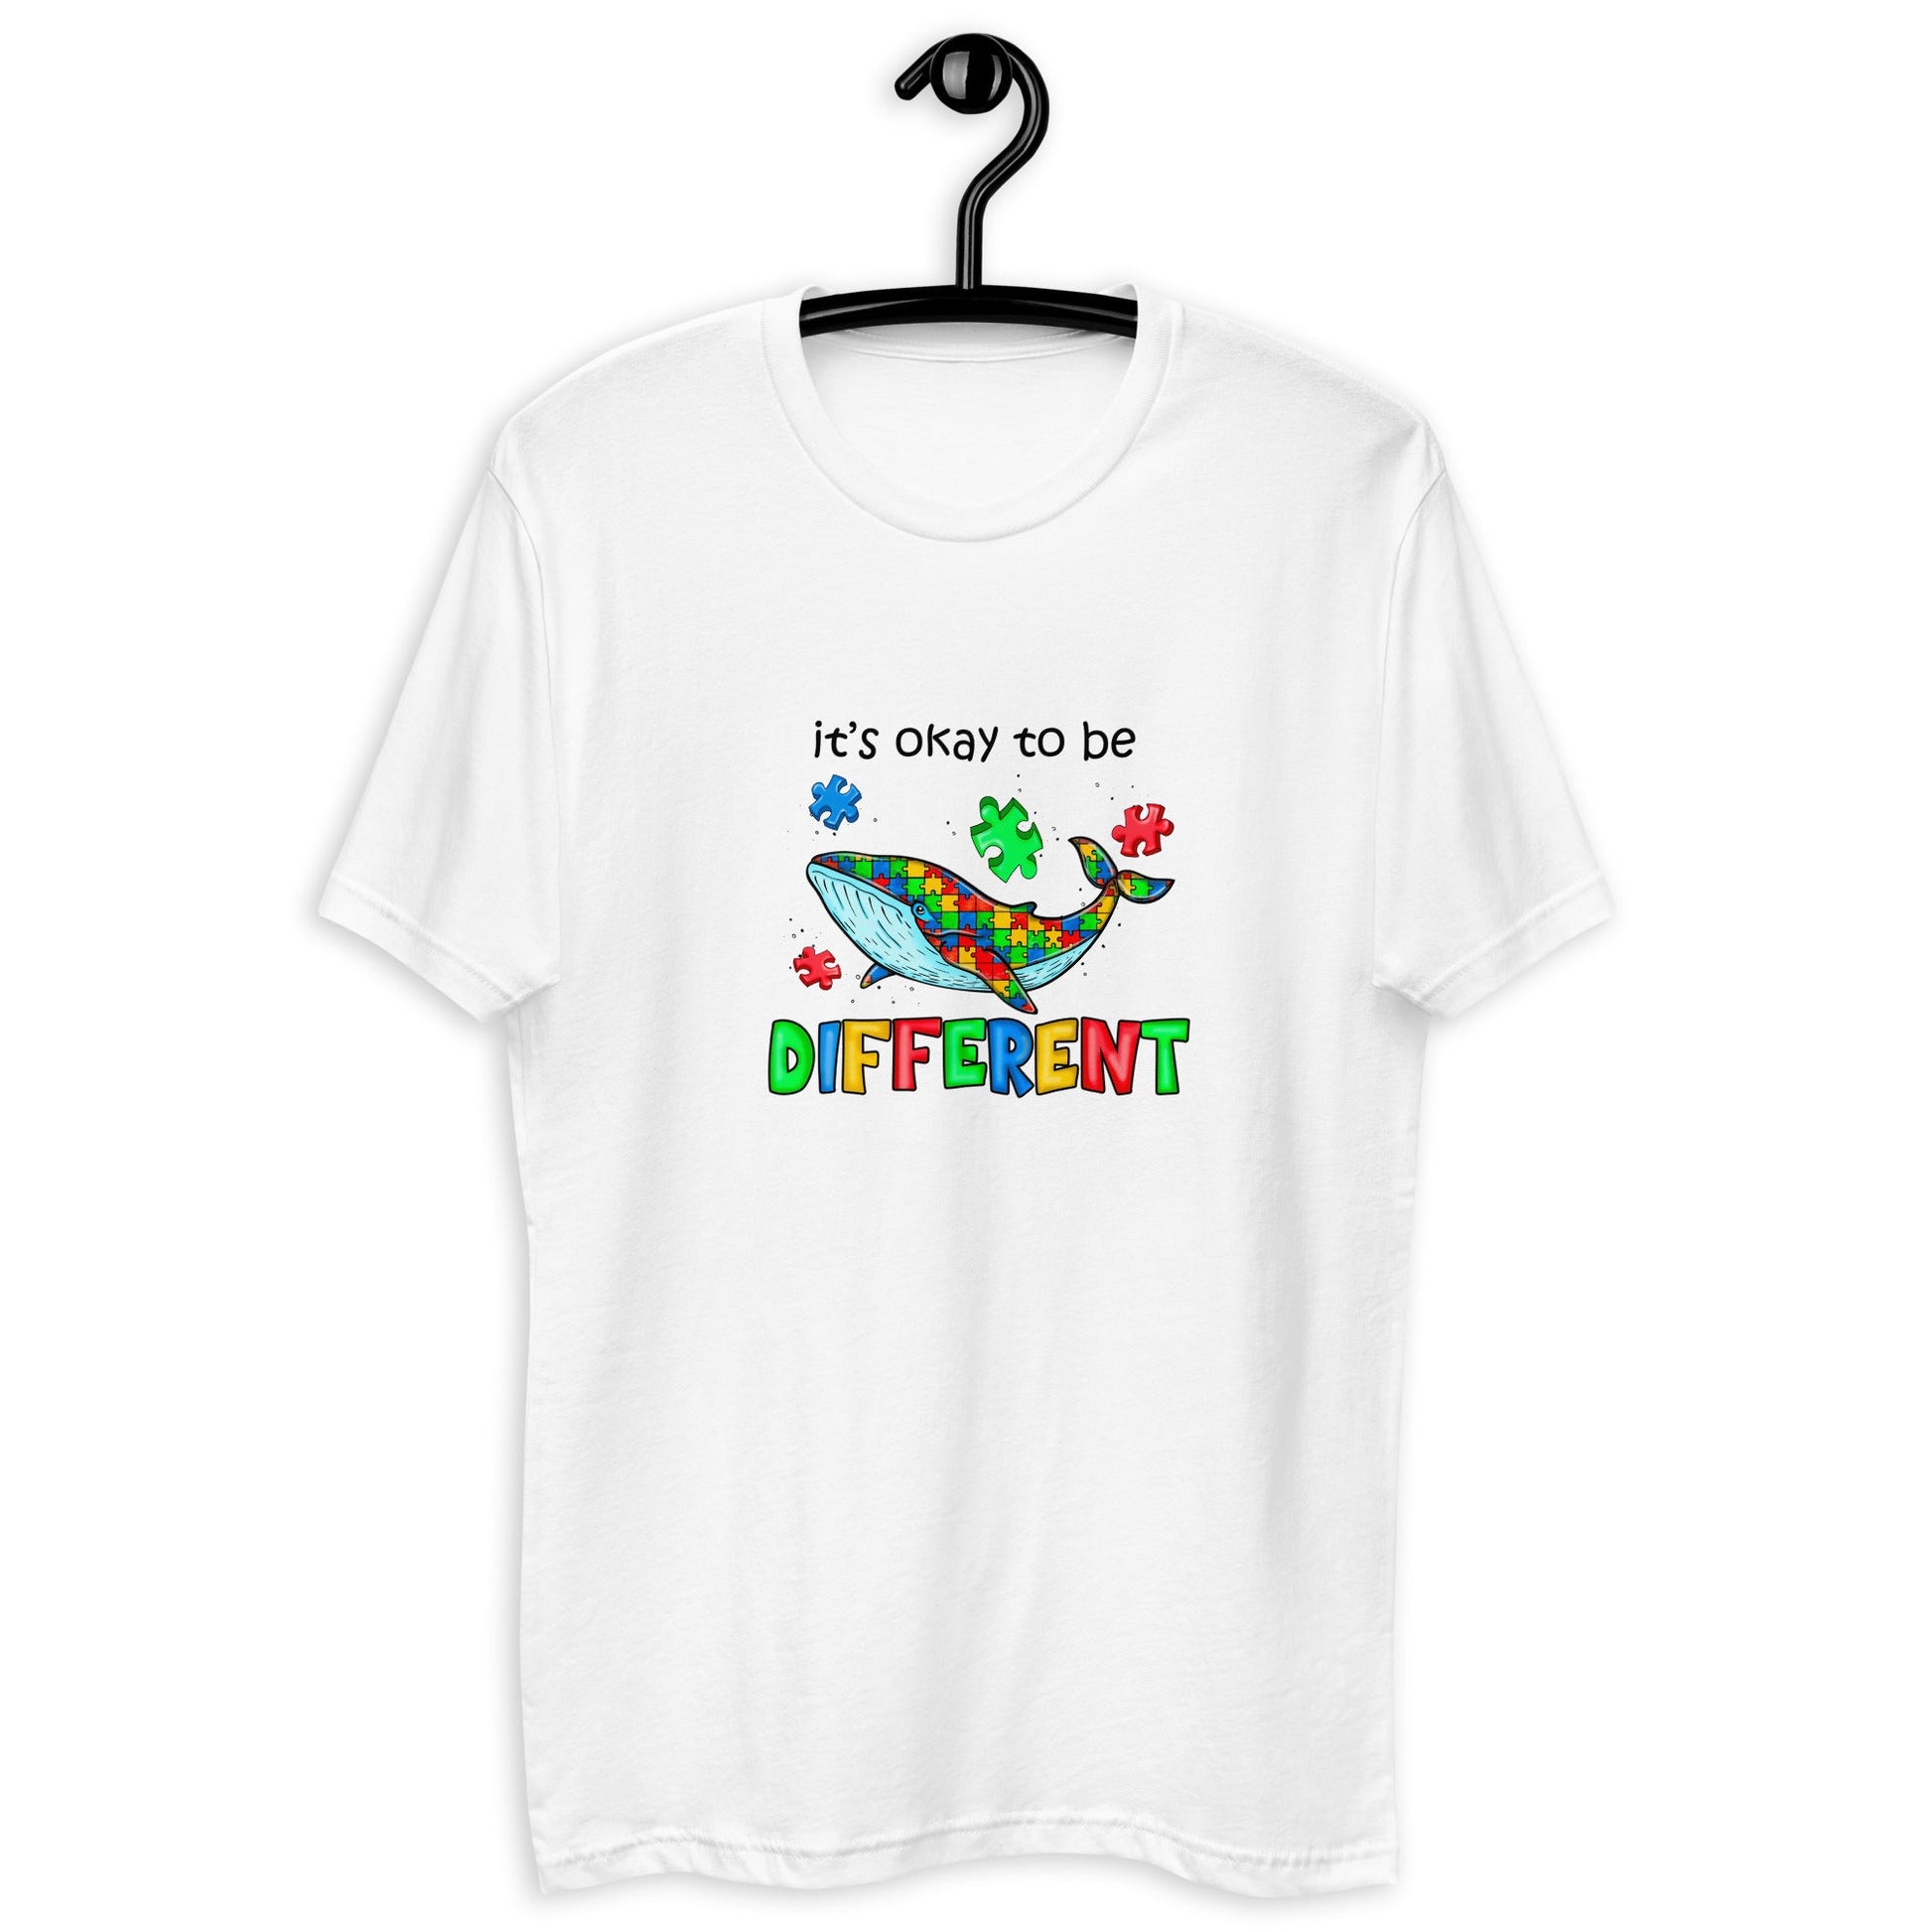 It's Okay To Be Different Unisex Short Sleeve T-shirt - Uniquely Included